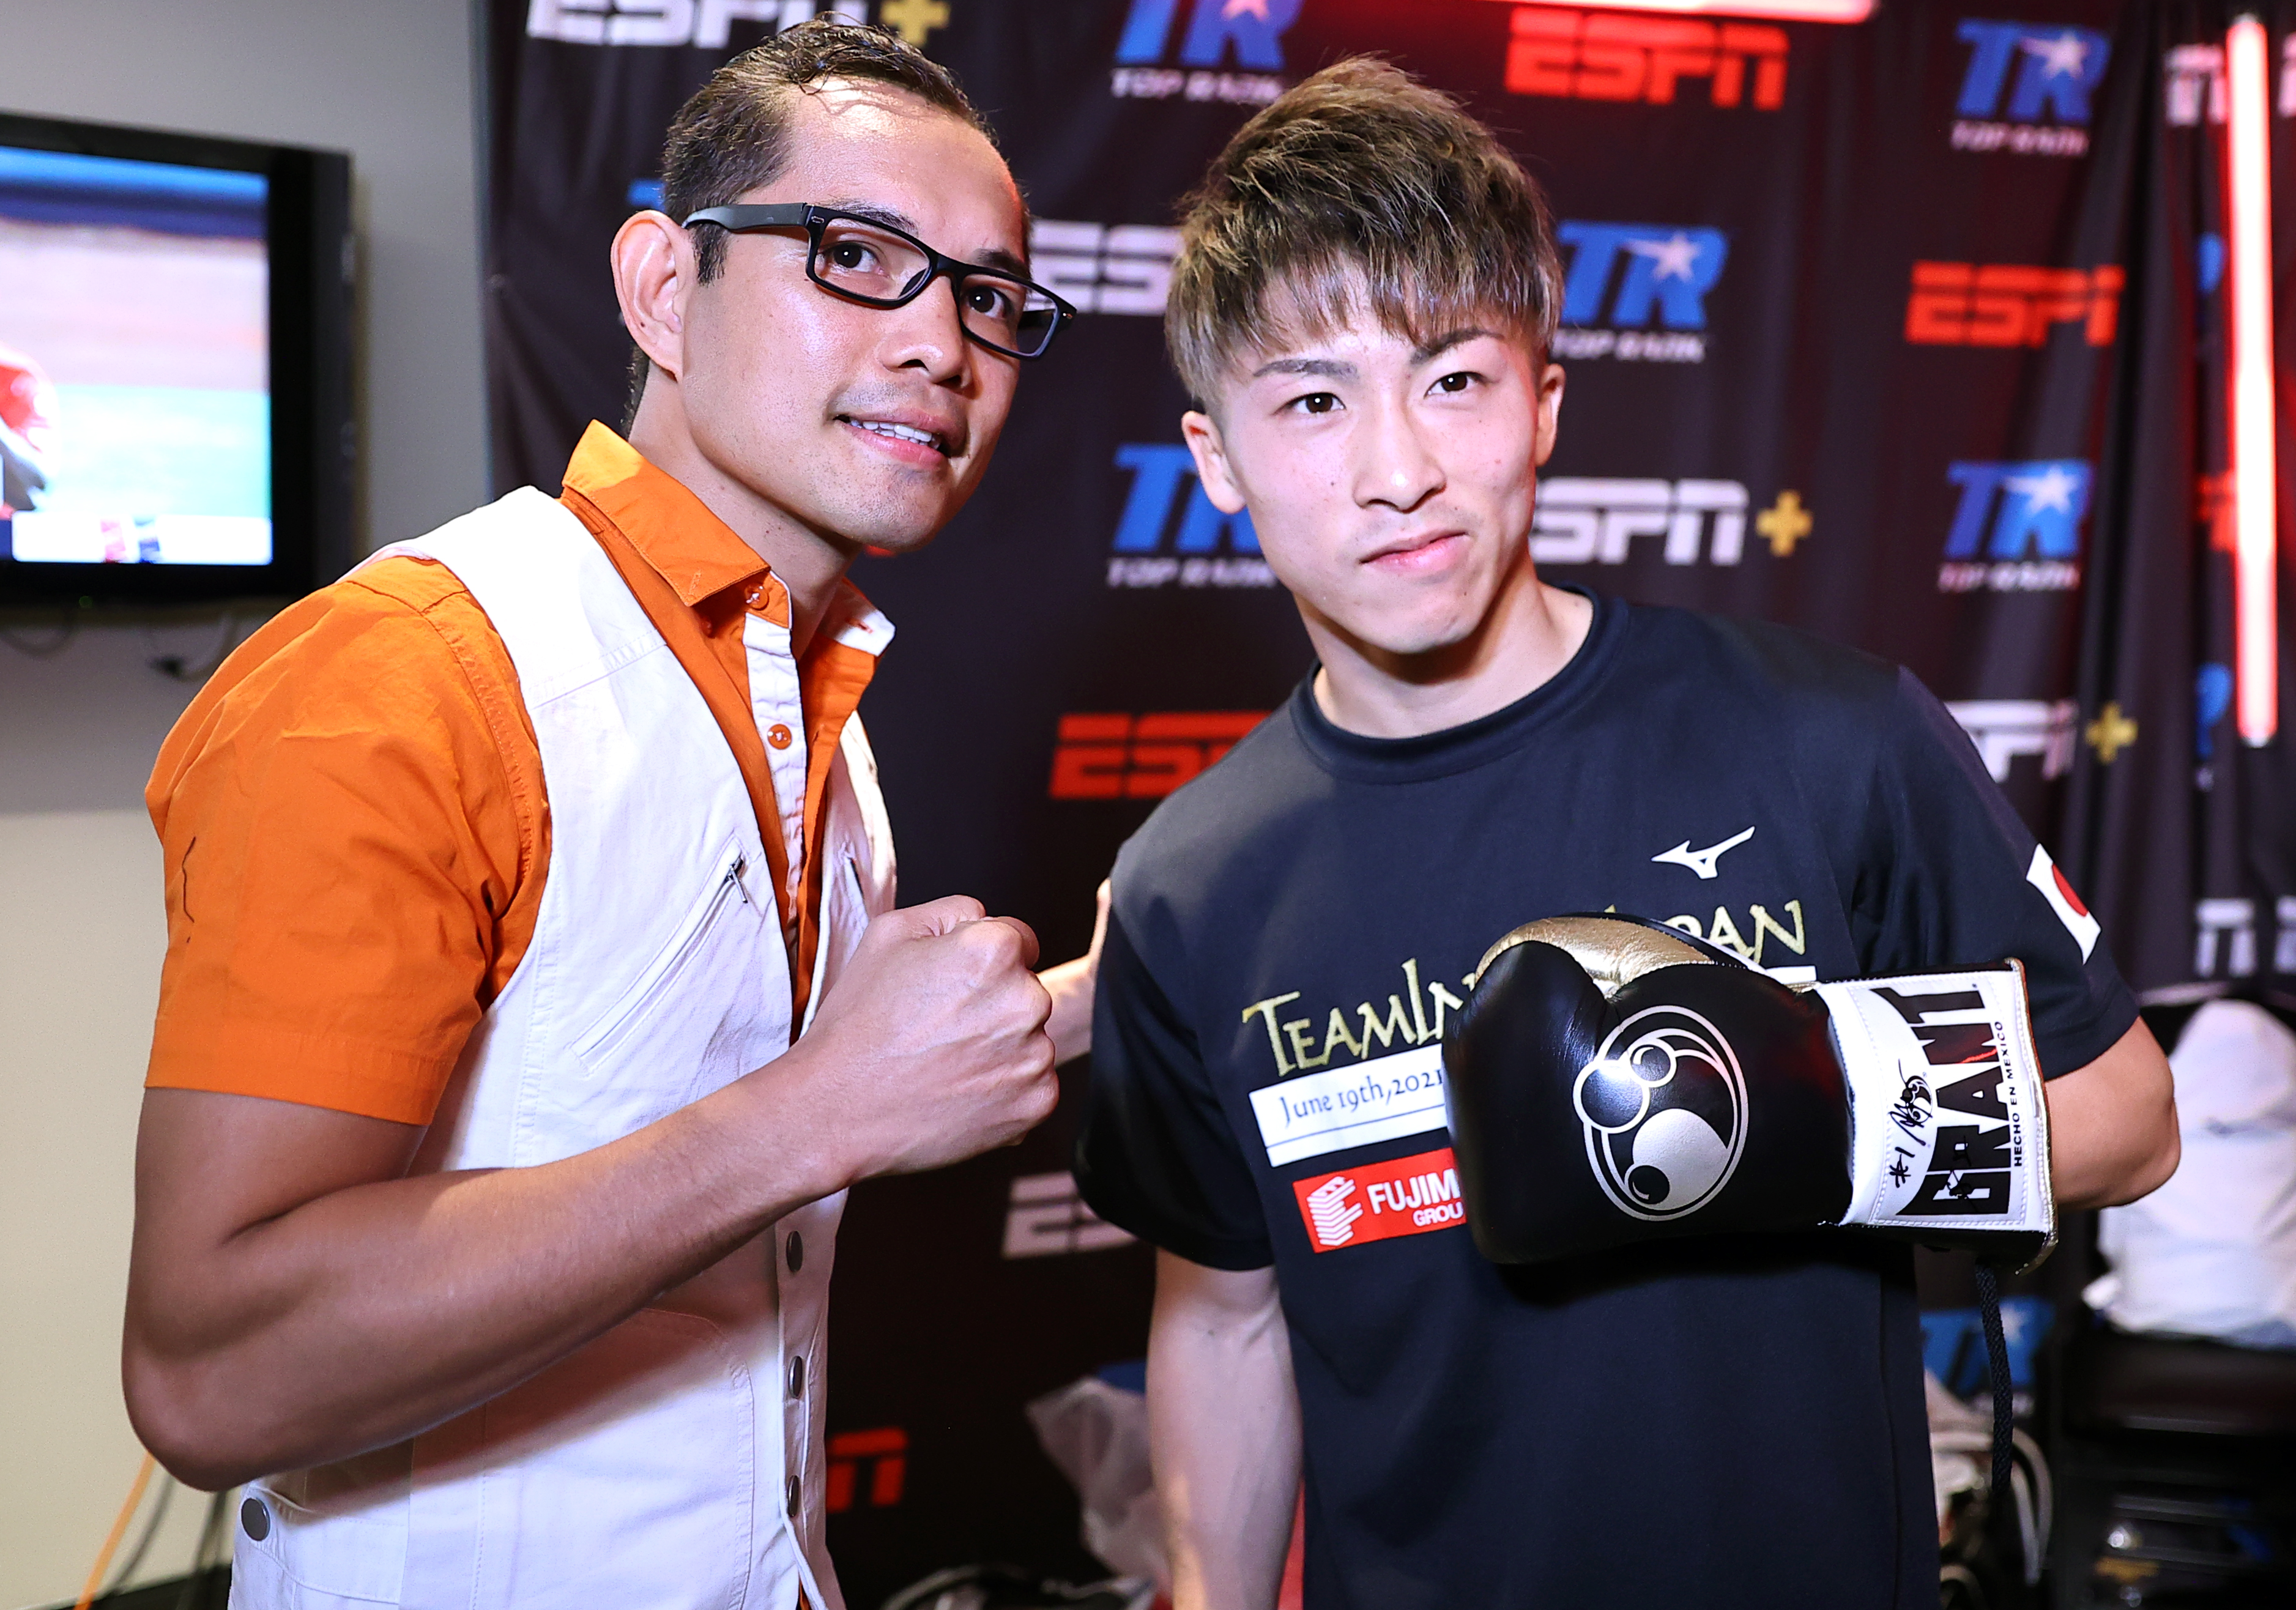 Naoya Inoue and Nonito Donaire meet again on Tuesday, here’s how you can watch the fight